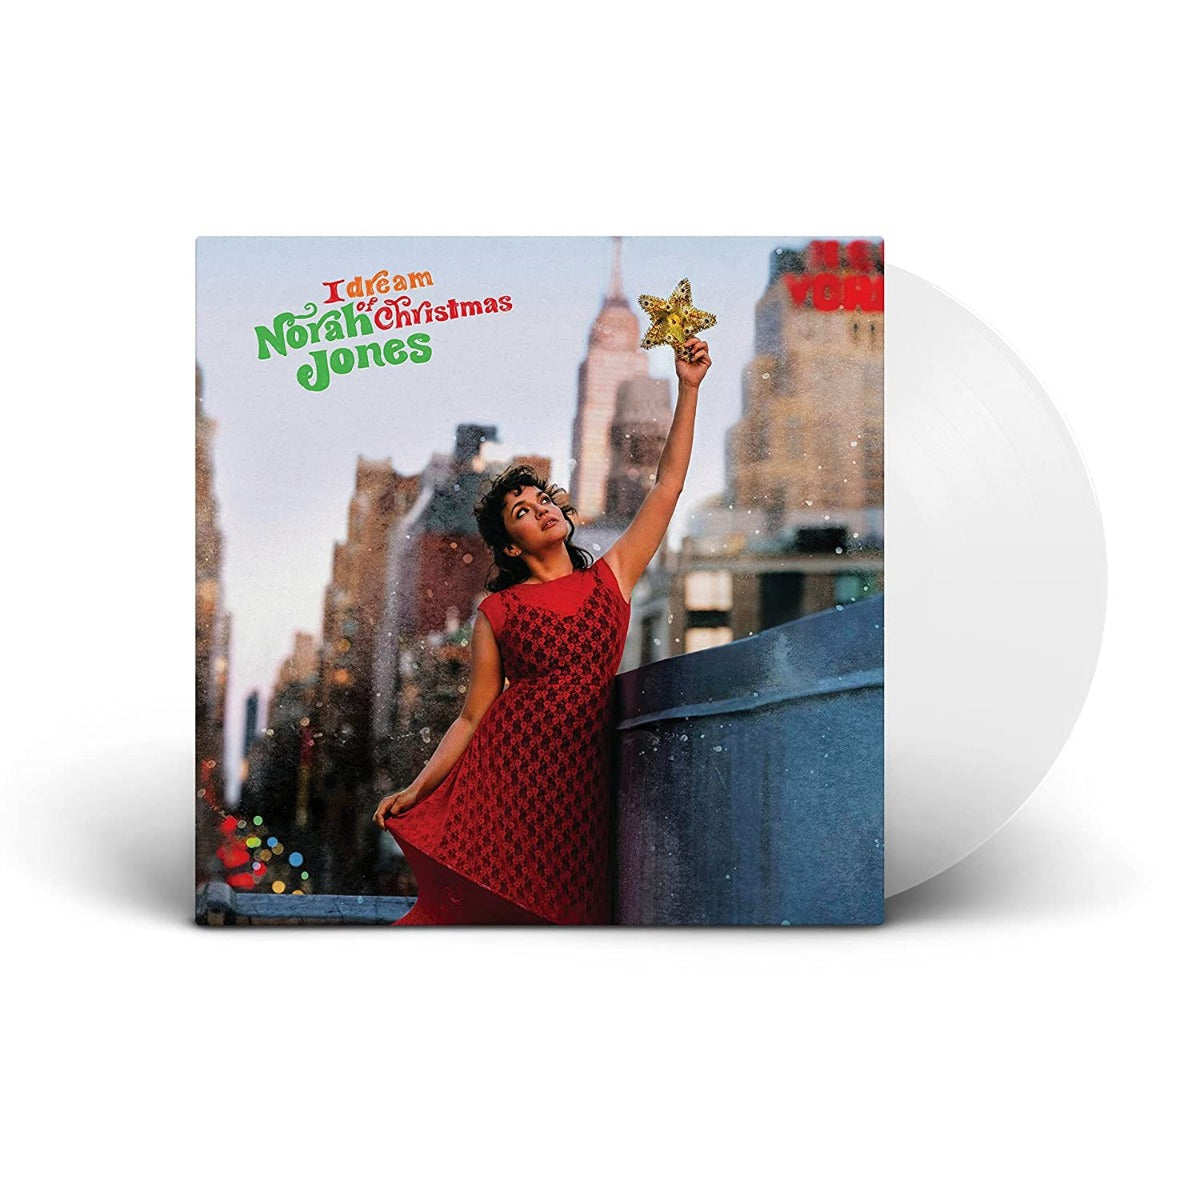 I Dream Of Christmas (Limited Edition, Colored Vinyl, White) [Import]